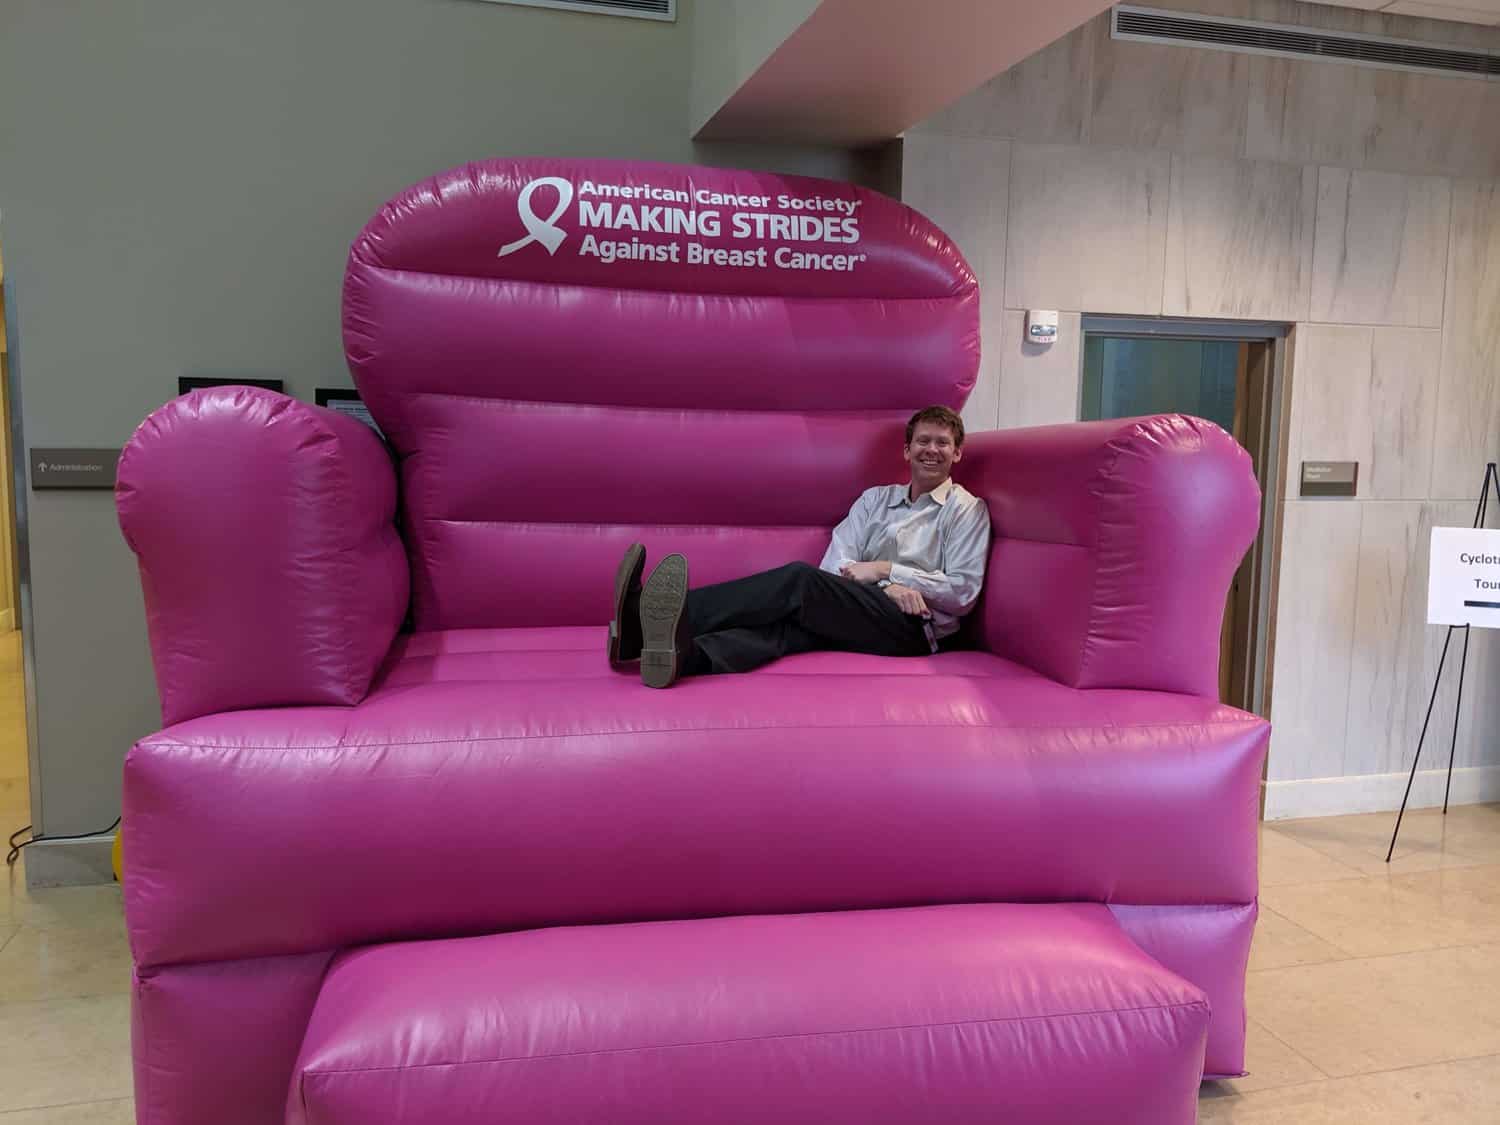 Dr. Mark Storey in a large inflatable pink chair